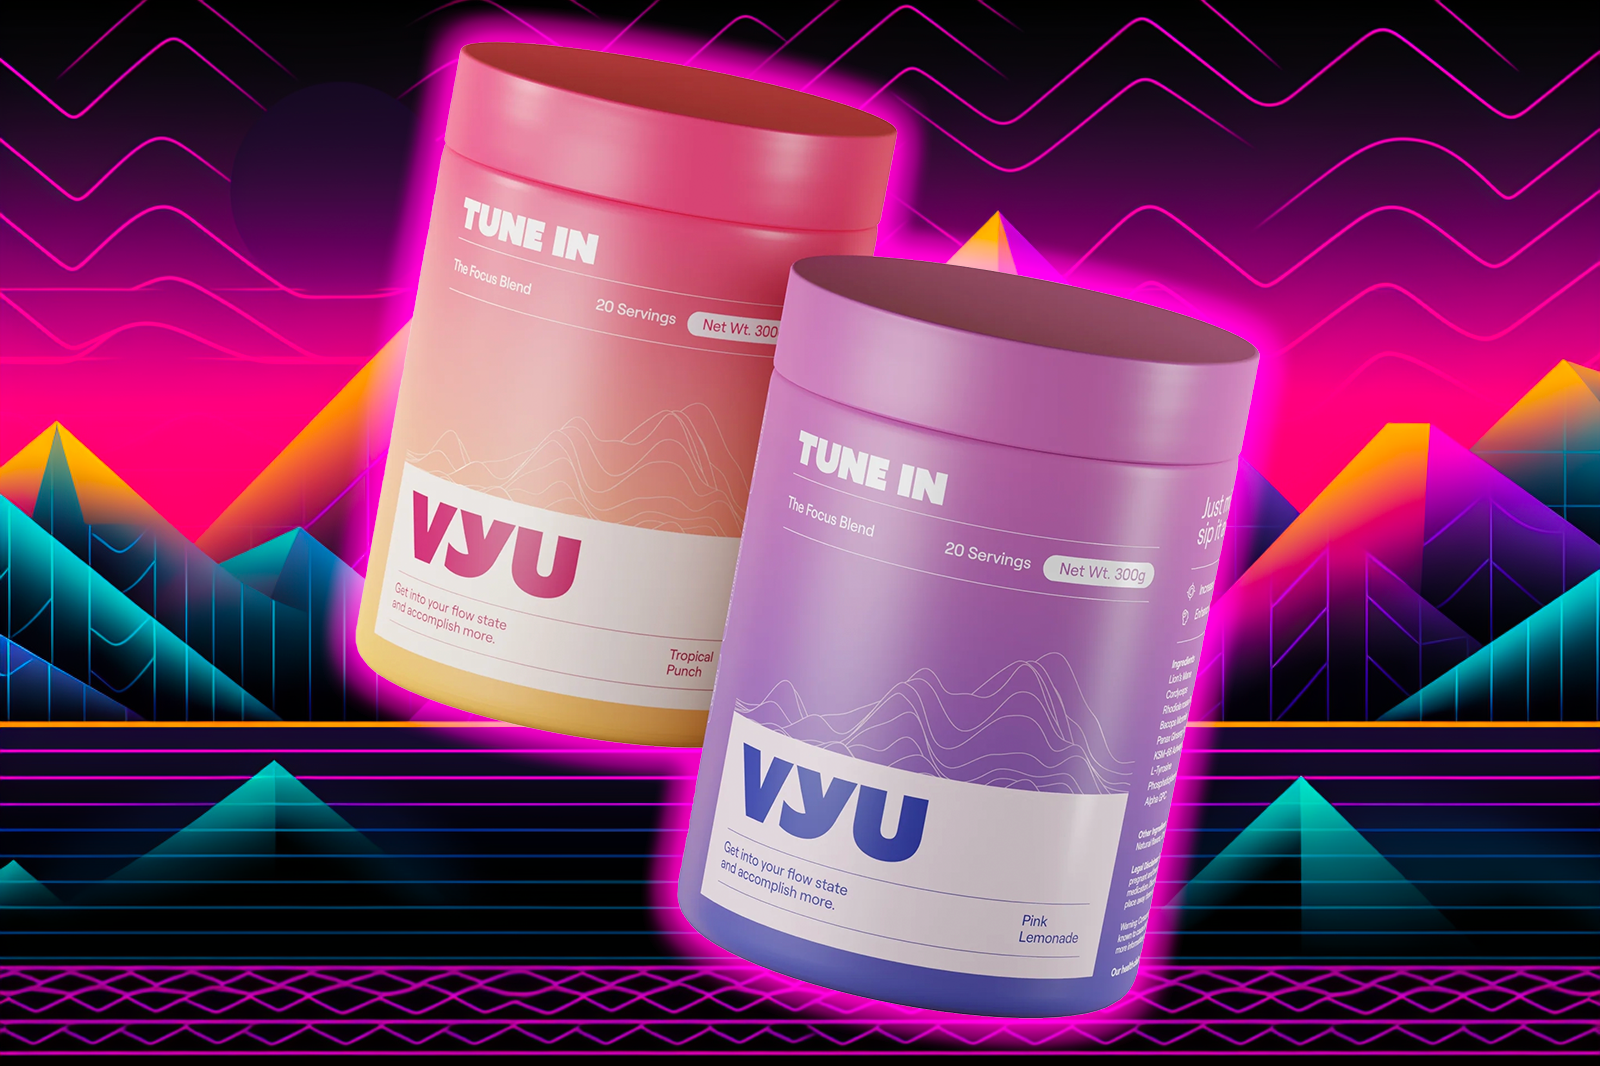 Two VYU TUNE IN 300g containers, red with tropical punch and purple with pink lemonade flavor, on a colorful background